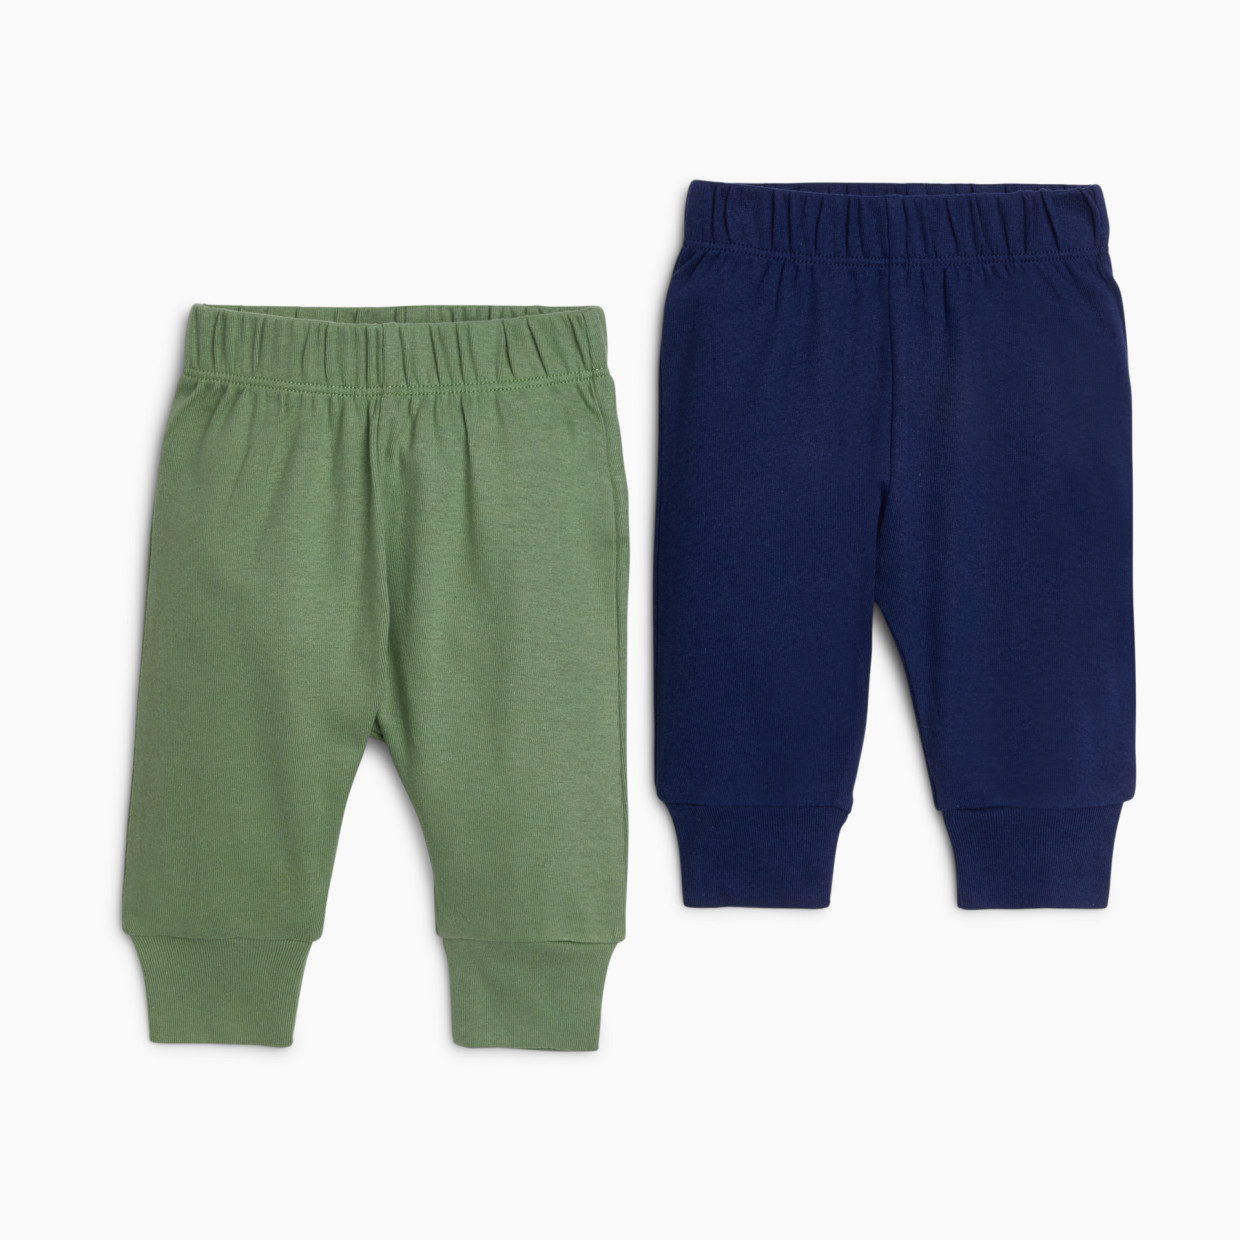 Small Story Pants (2 Pack) - Navy/Green, Nb | Babylist Shop